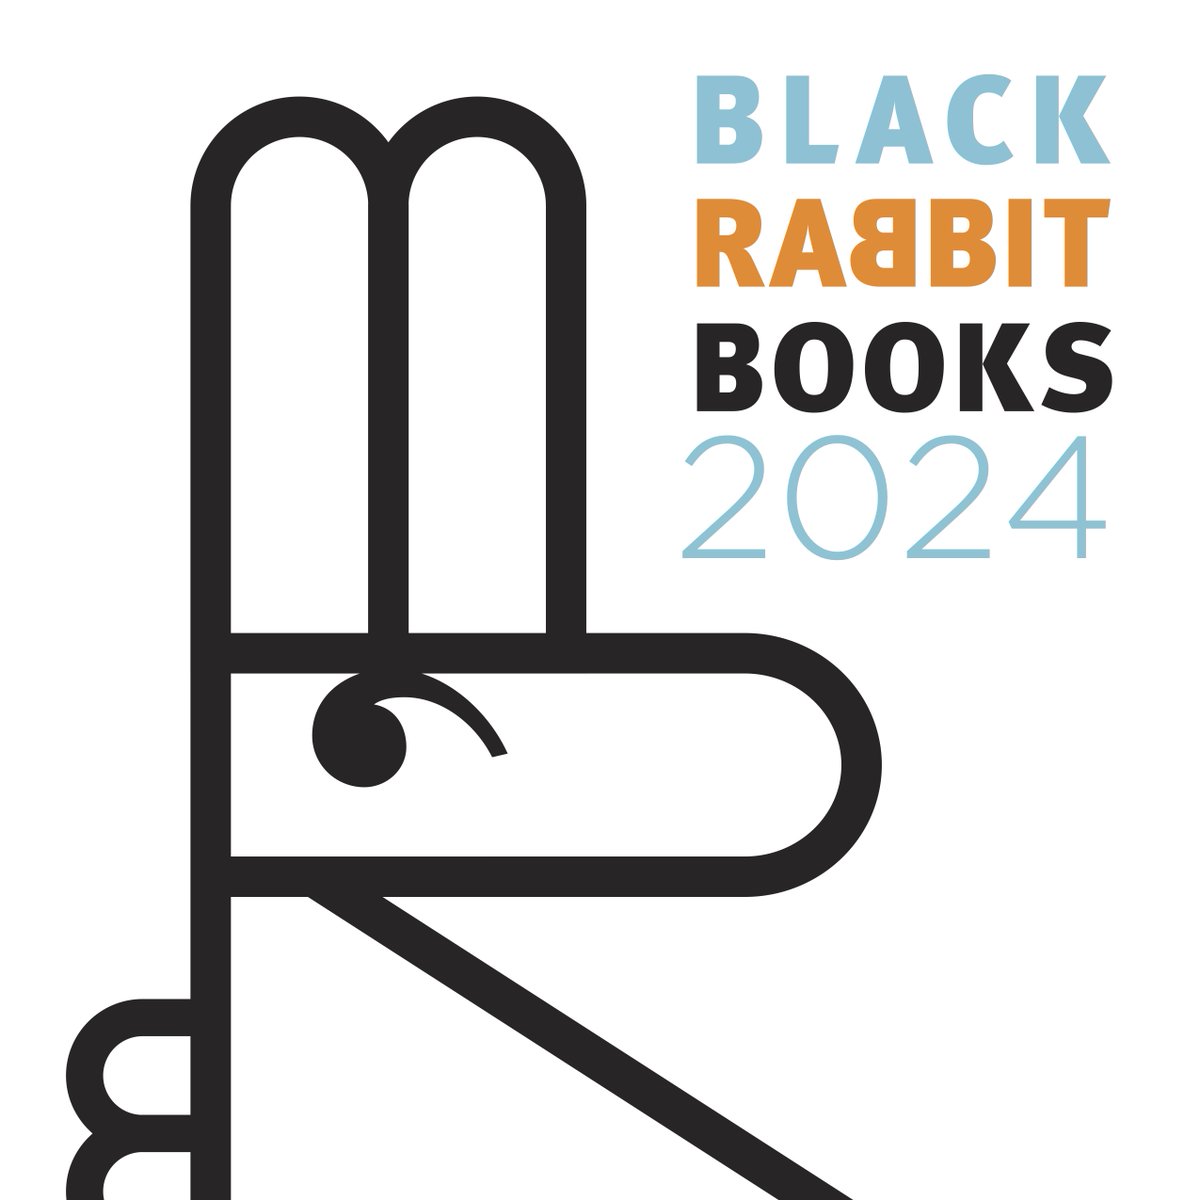 Get ready for back-to-school with new series nonfiction from Black Rabbit. High interest topics and engaging stories will have your reluctant readers reaching for their next book.

#newbooks #childrensbooks #strugglingreaders #reluctantreaders #backtoschool #BlackRabbitBooks